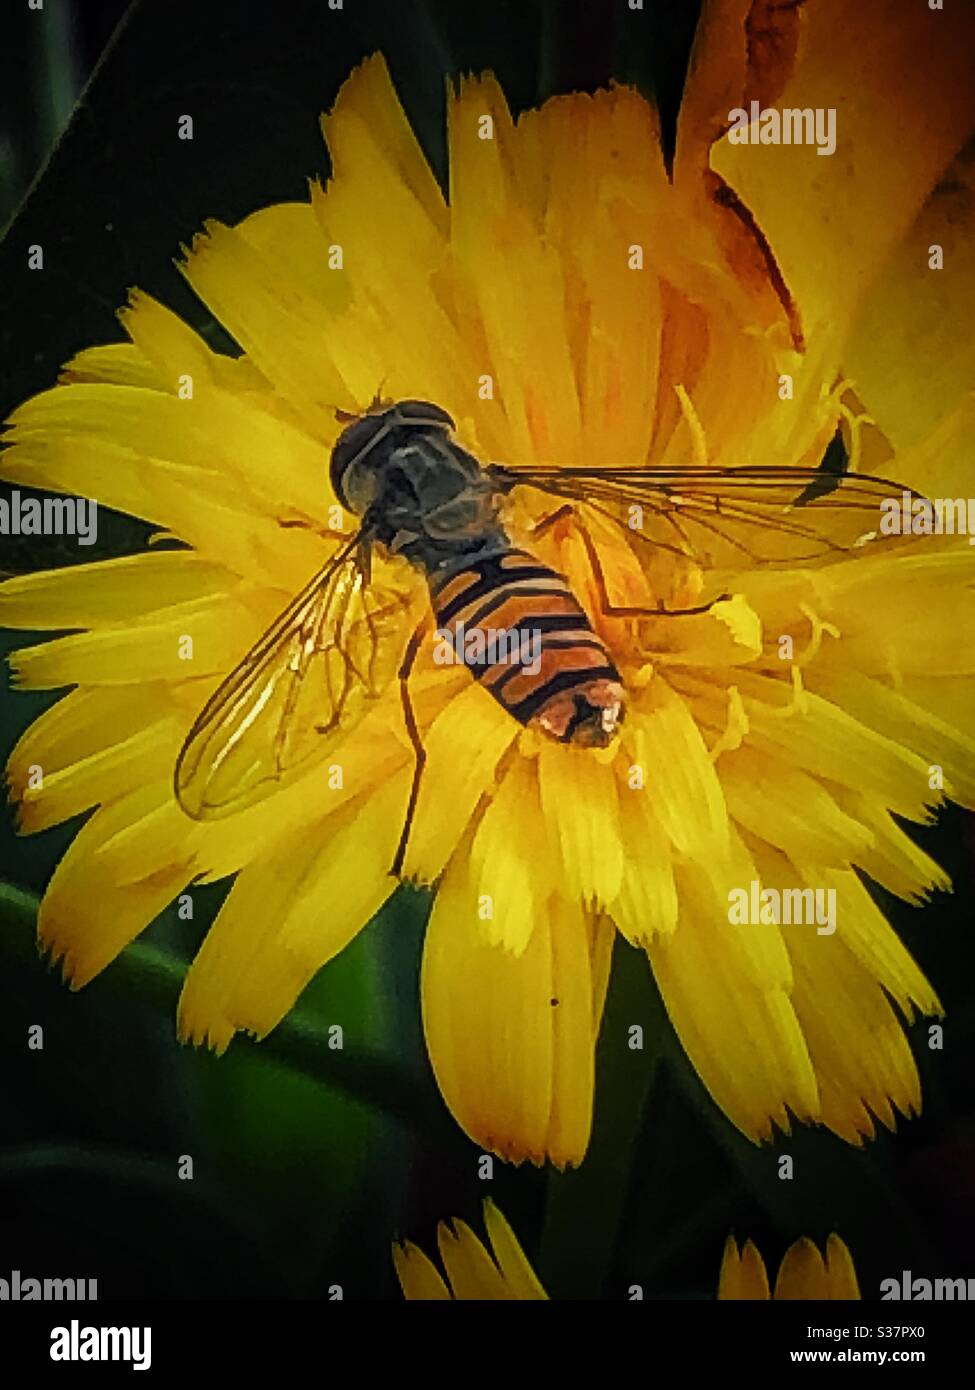 Hoverfly on a yellow flower. Stock Photo